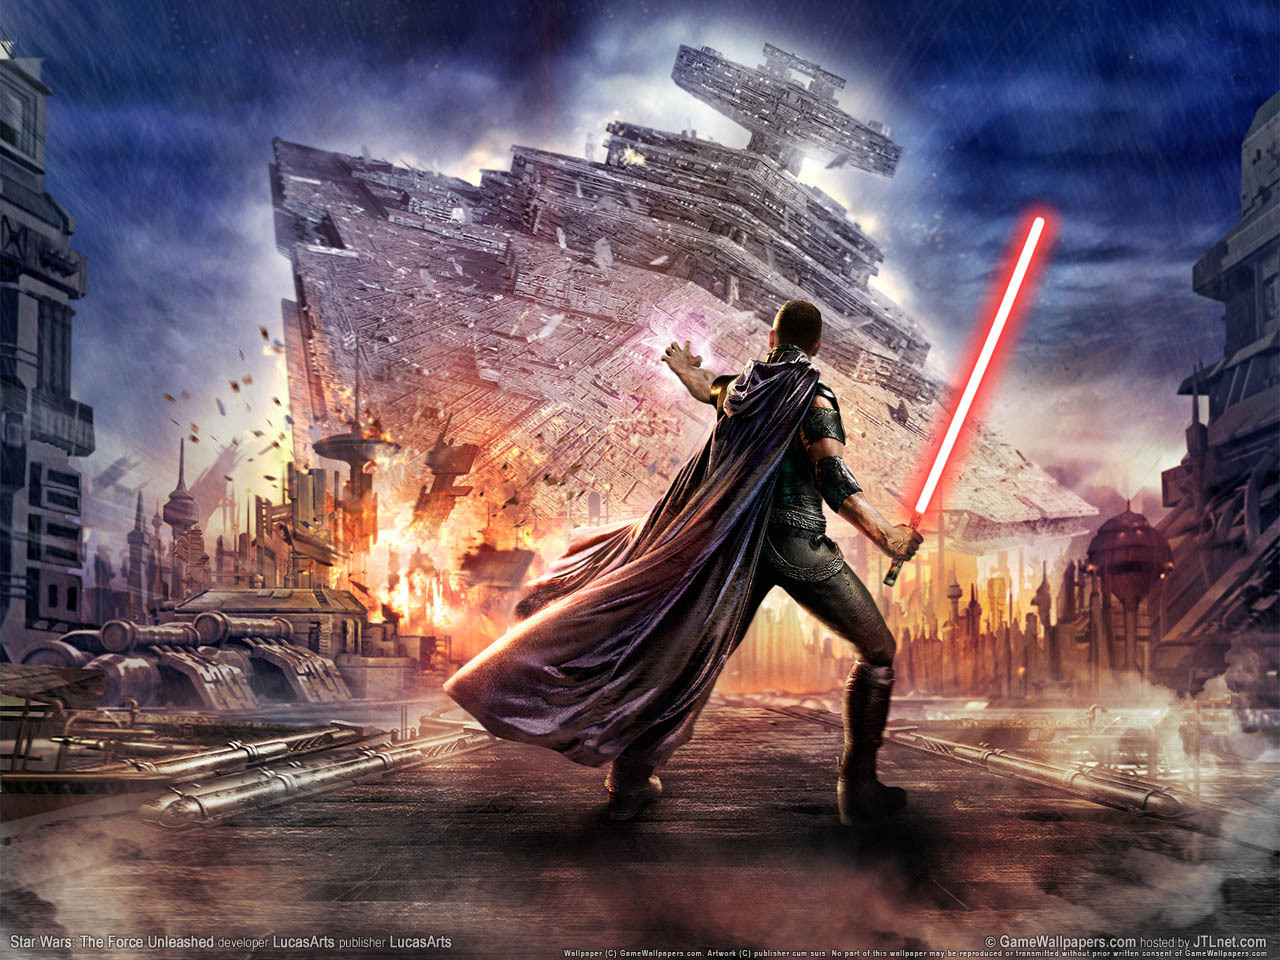  WarsThe Force Unleashed Wars The Force